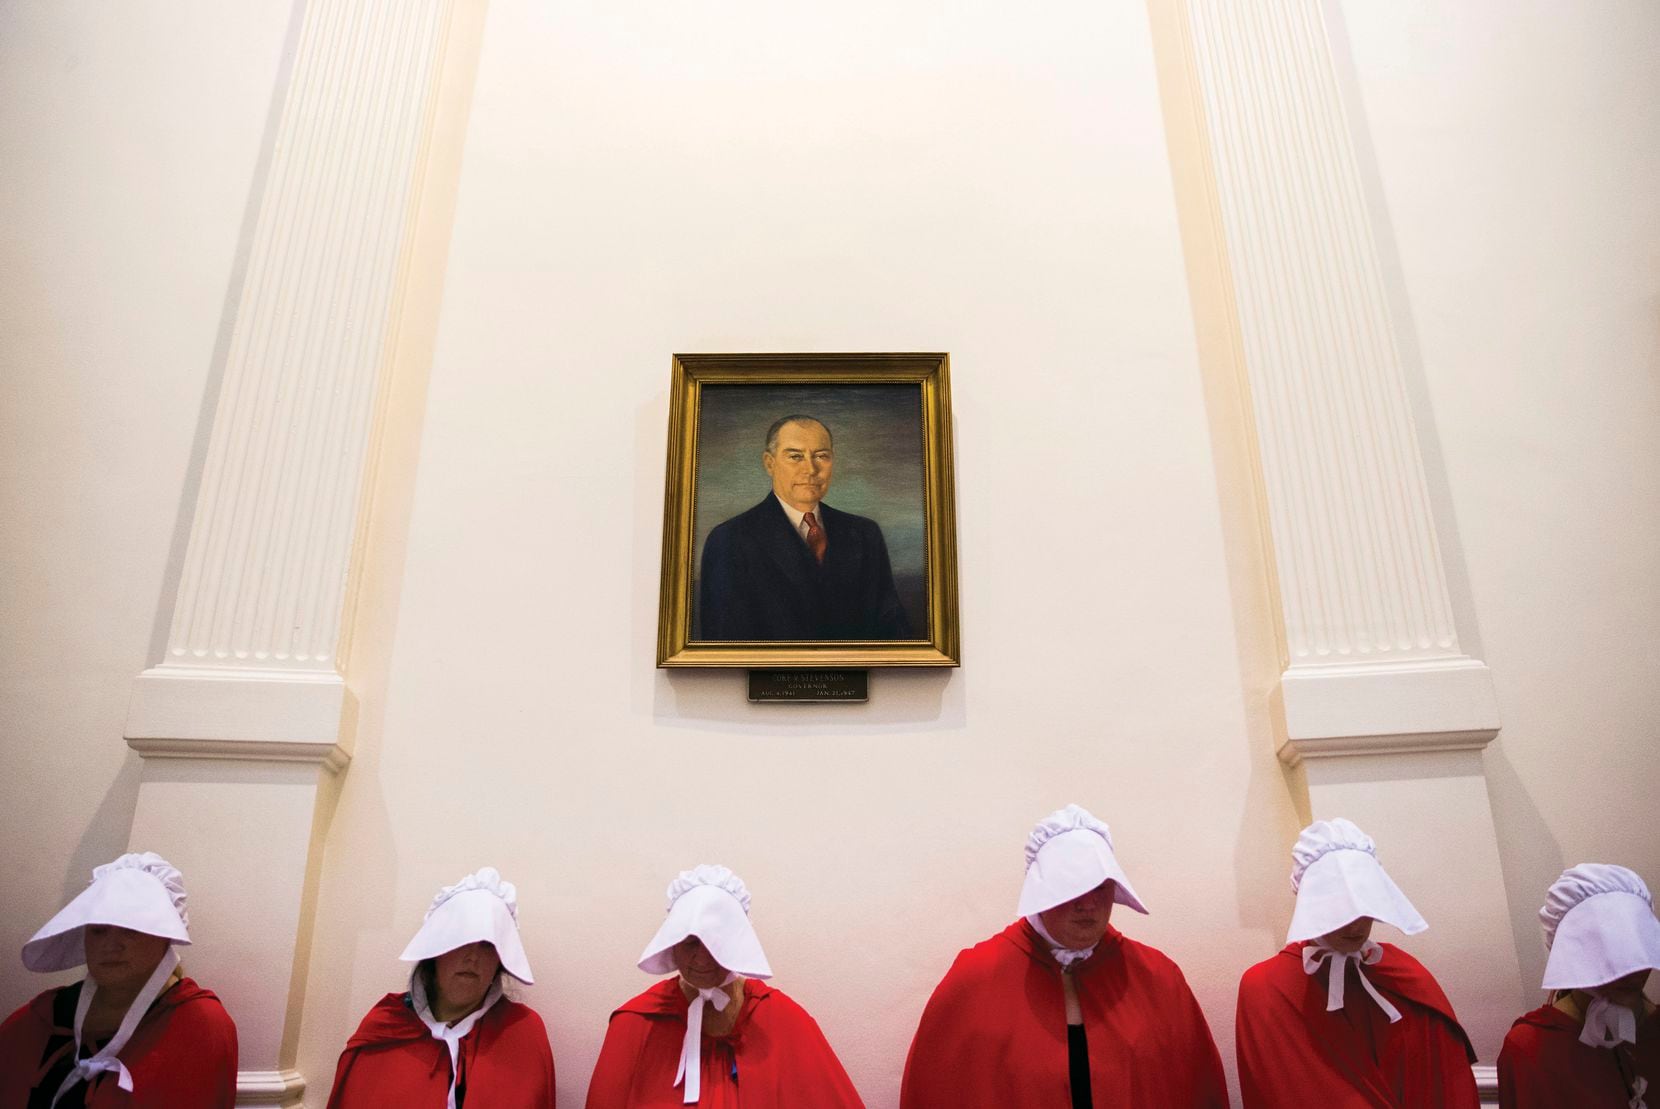 Dressed as the oppressed characters of "The Handmaid's Tale," supporters of women's health rights stand under a portrait of former Gov. Coke Stevenson inside the Capitol rotunda in Austin as the Texas Senate considered several abortion-related bills in a legislative special session.